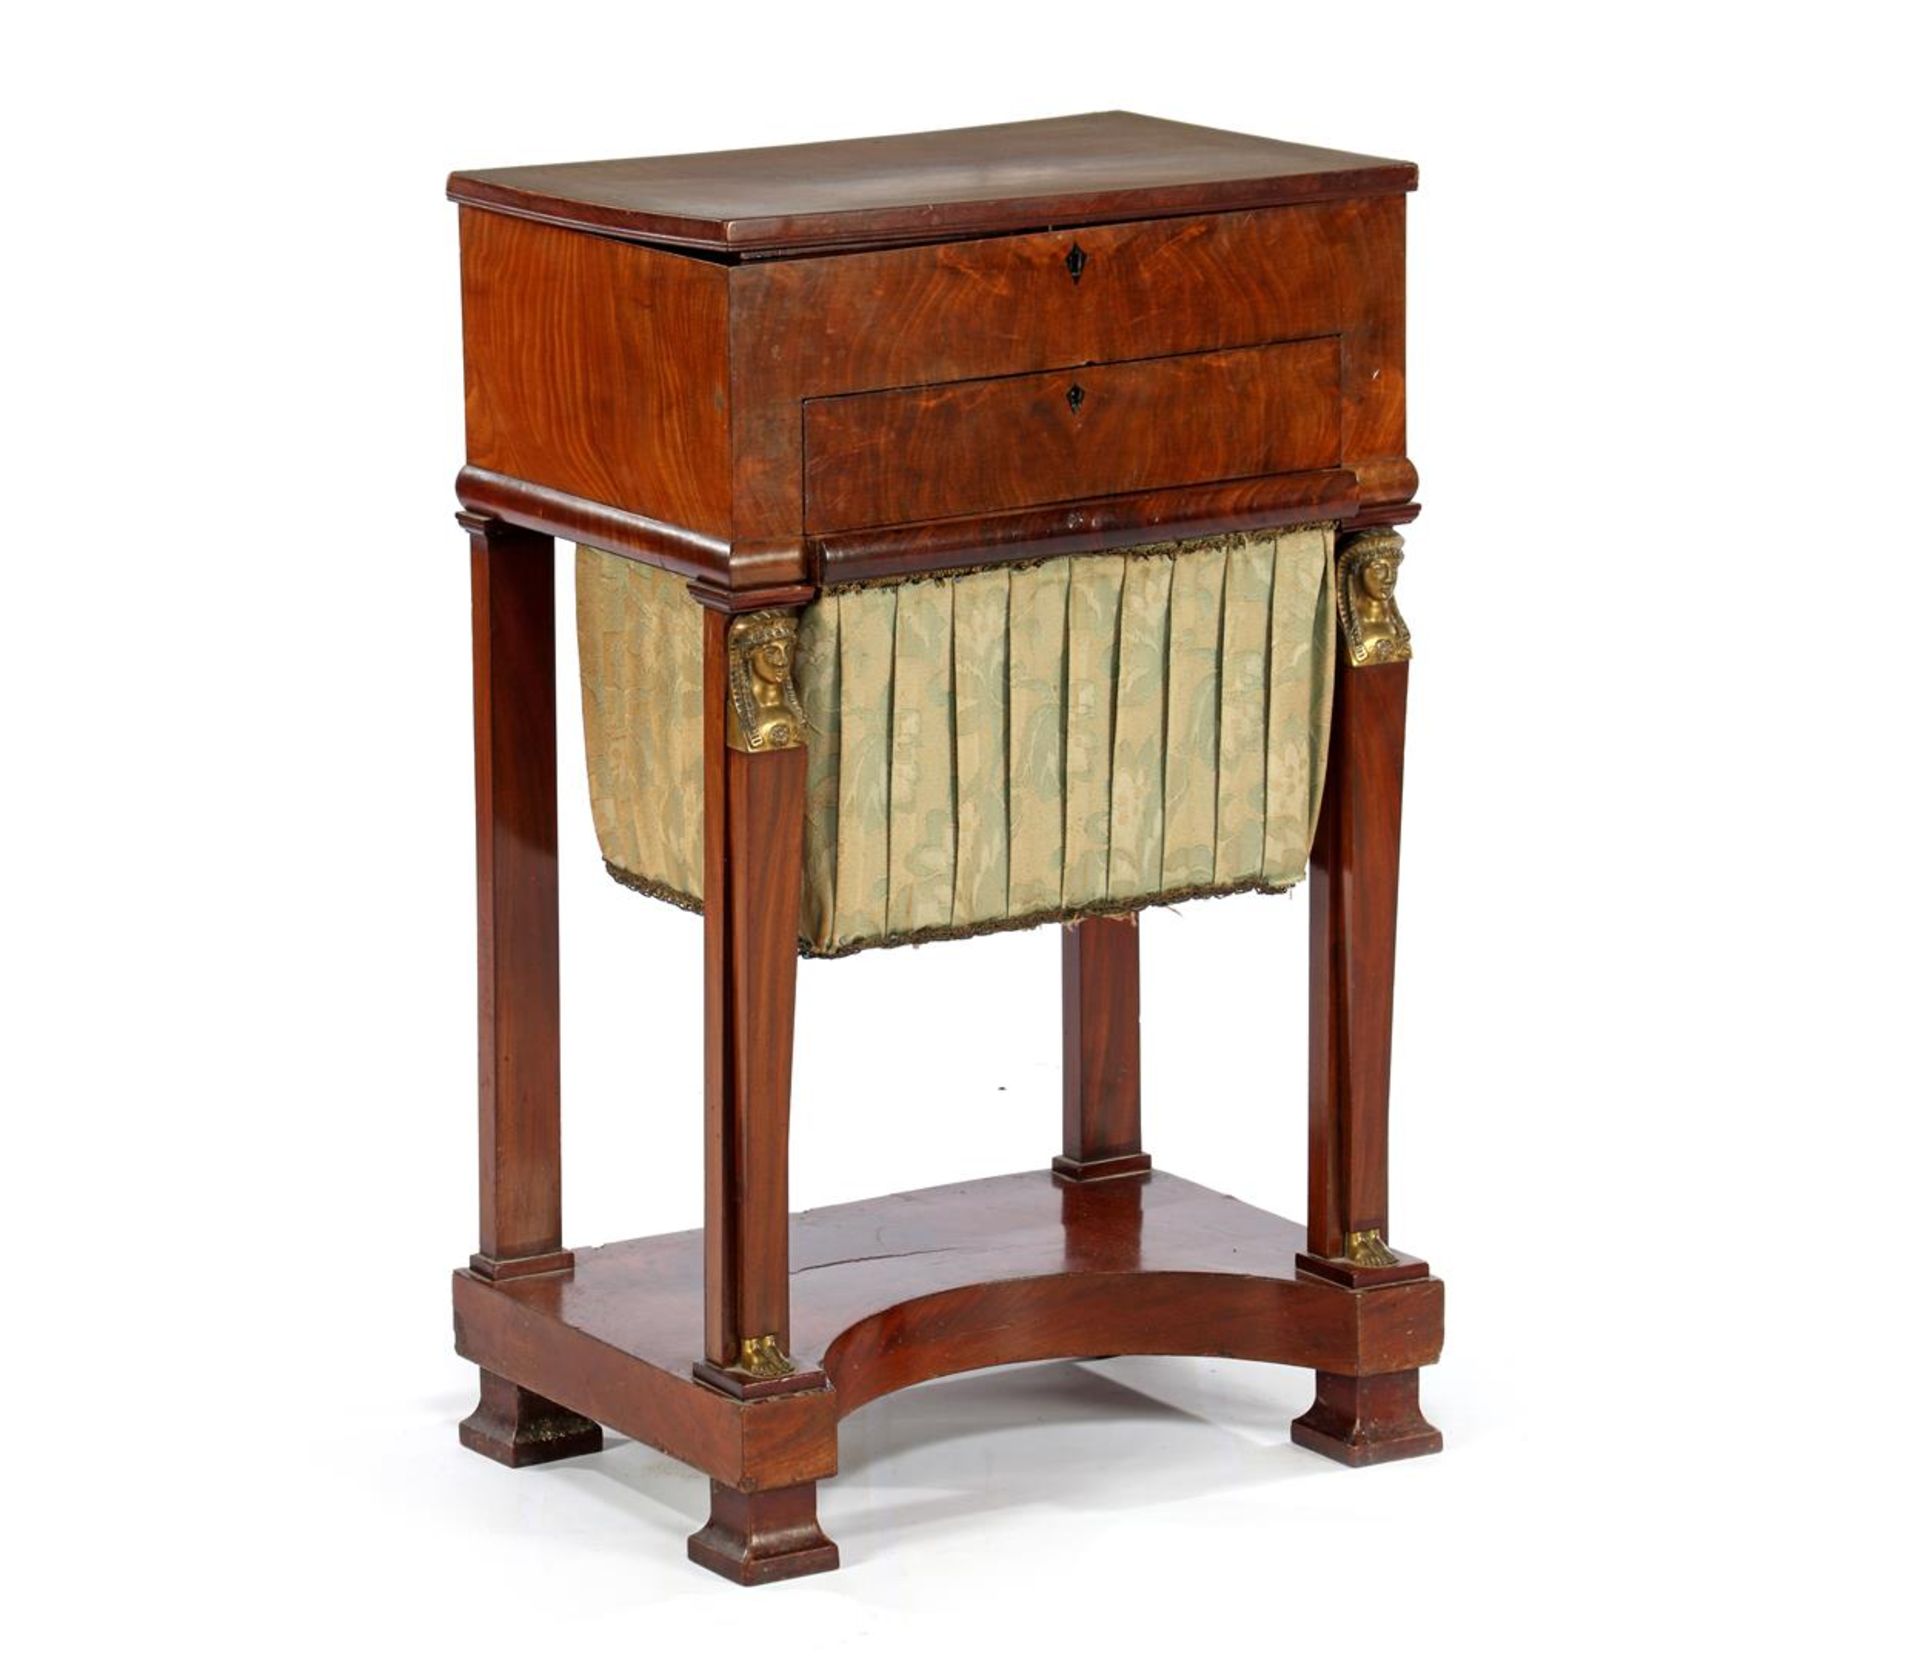 Mahogany Empire style craft furniture with flap